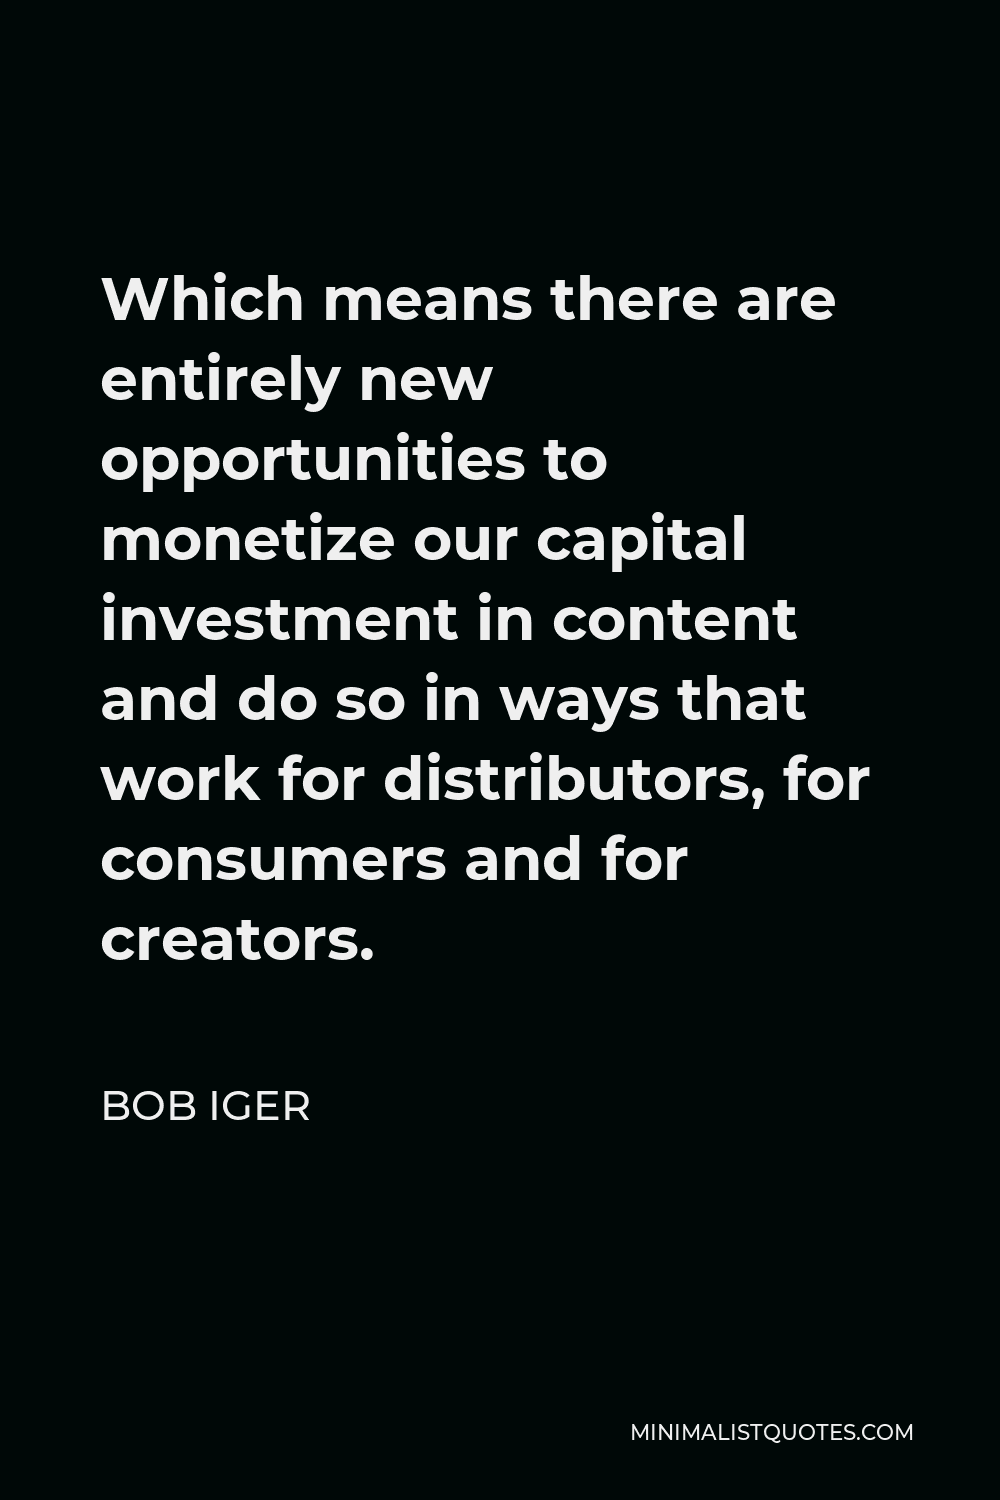 Bob Iger Quote - Which means there are entirely new opportunities to monetize our capital investment in content and do so in ways that work for distributors, for consumers and for creators.